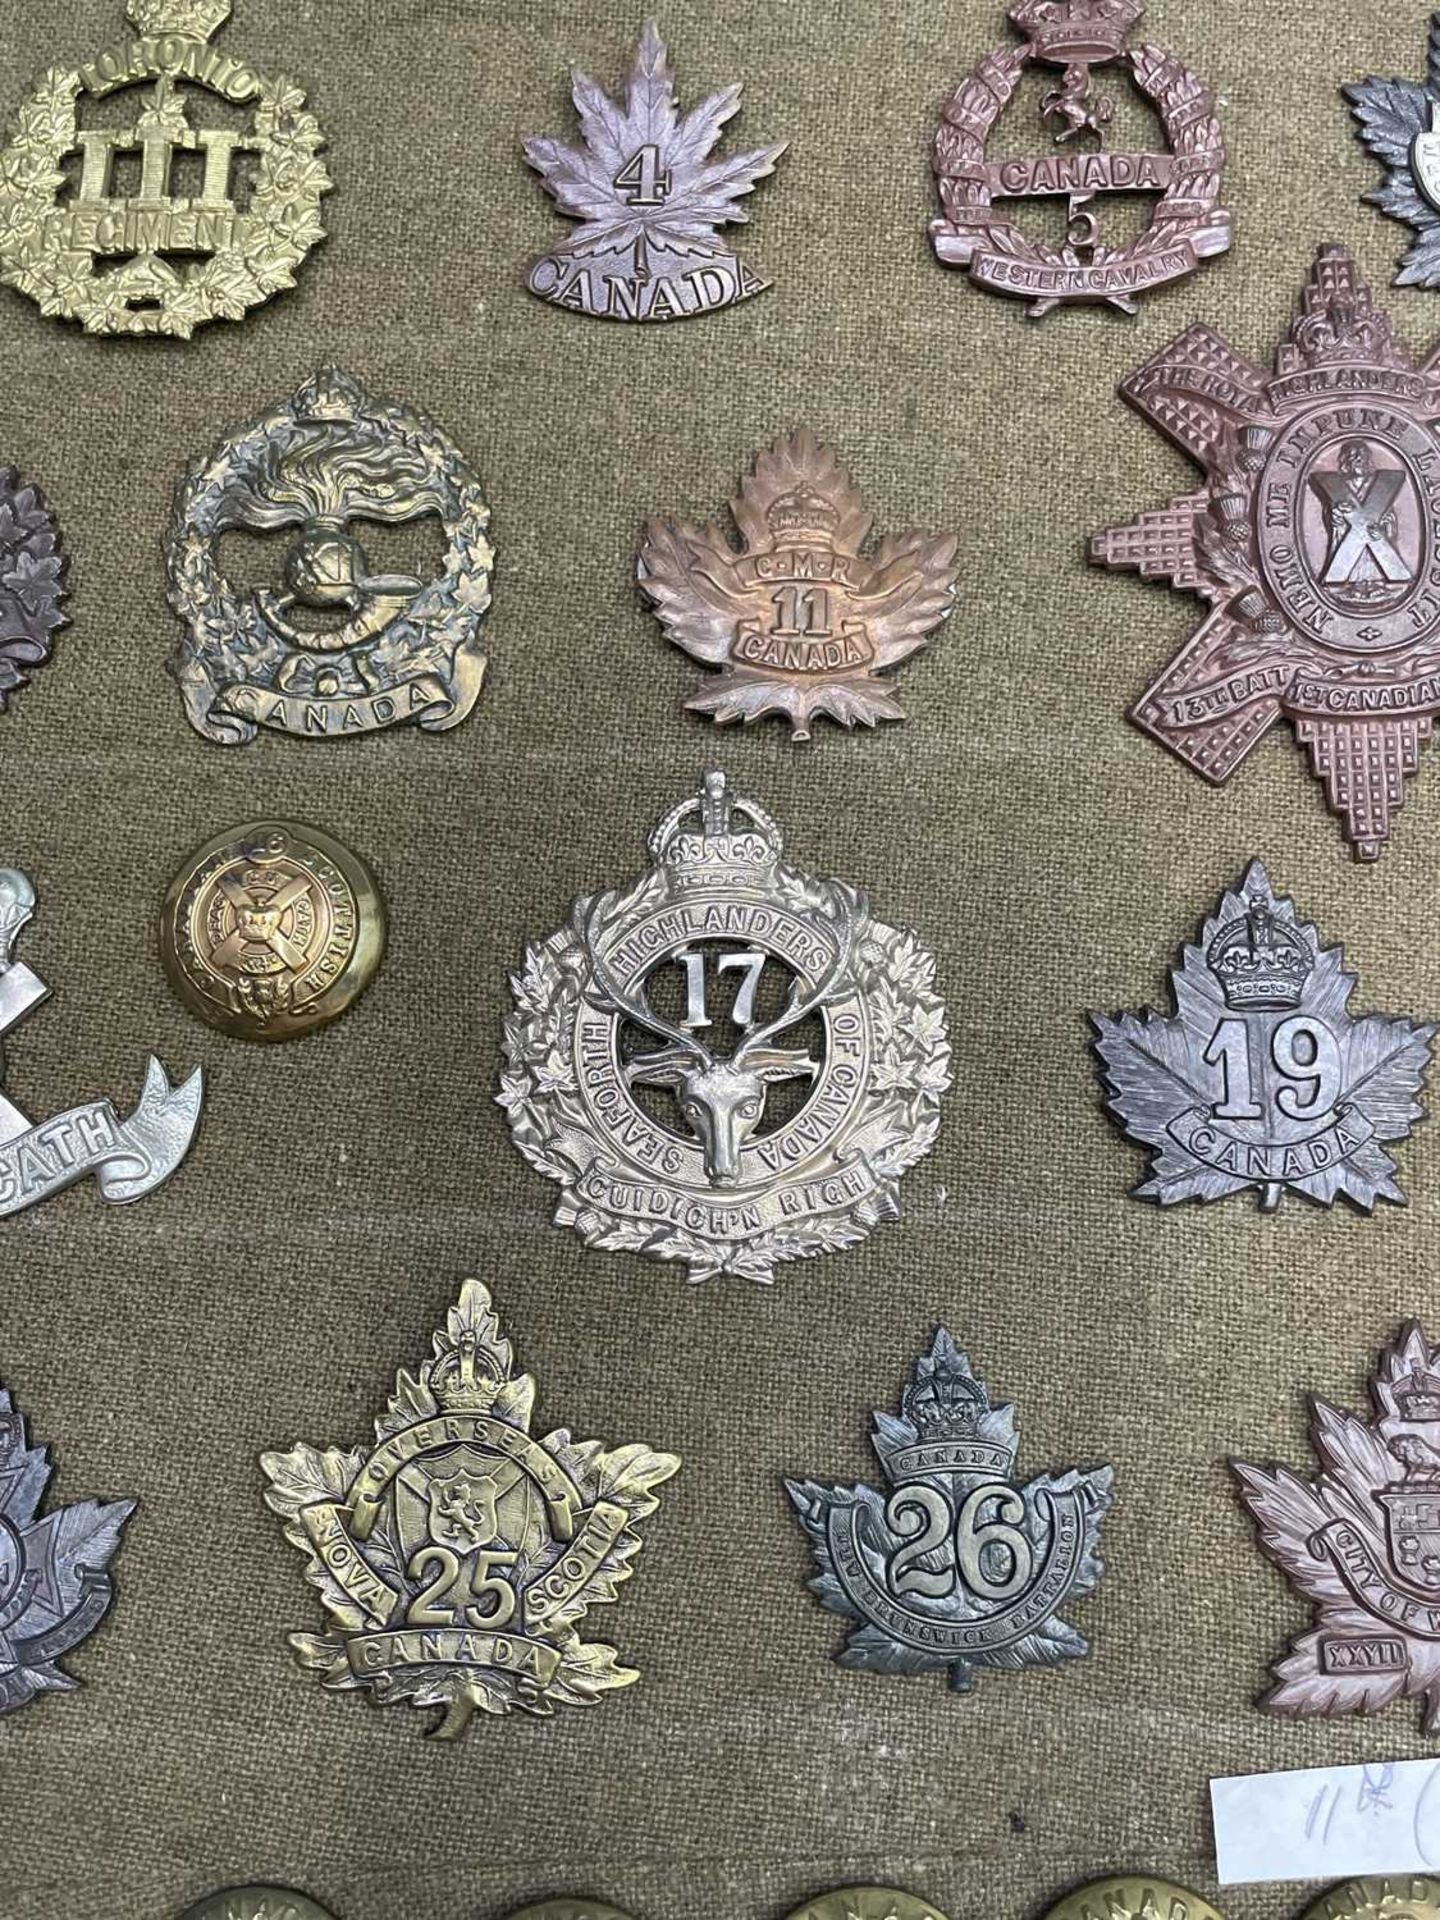 Canadian Expeditionary Forces 1 to 39 Battalions. A display card containing cap badges, collar dogs, - Image 5 of 5